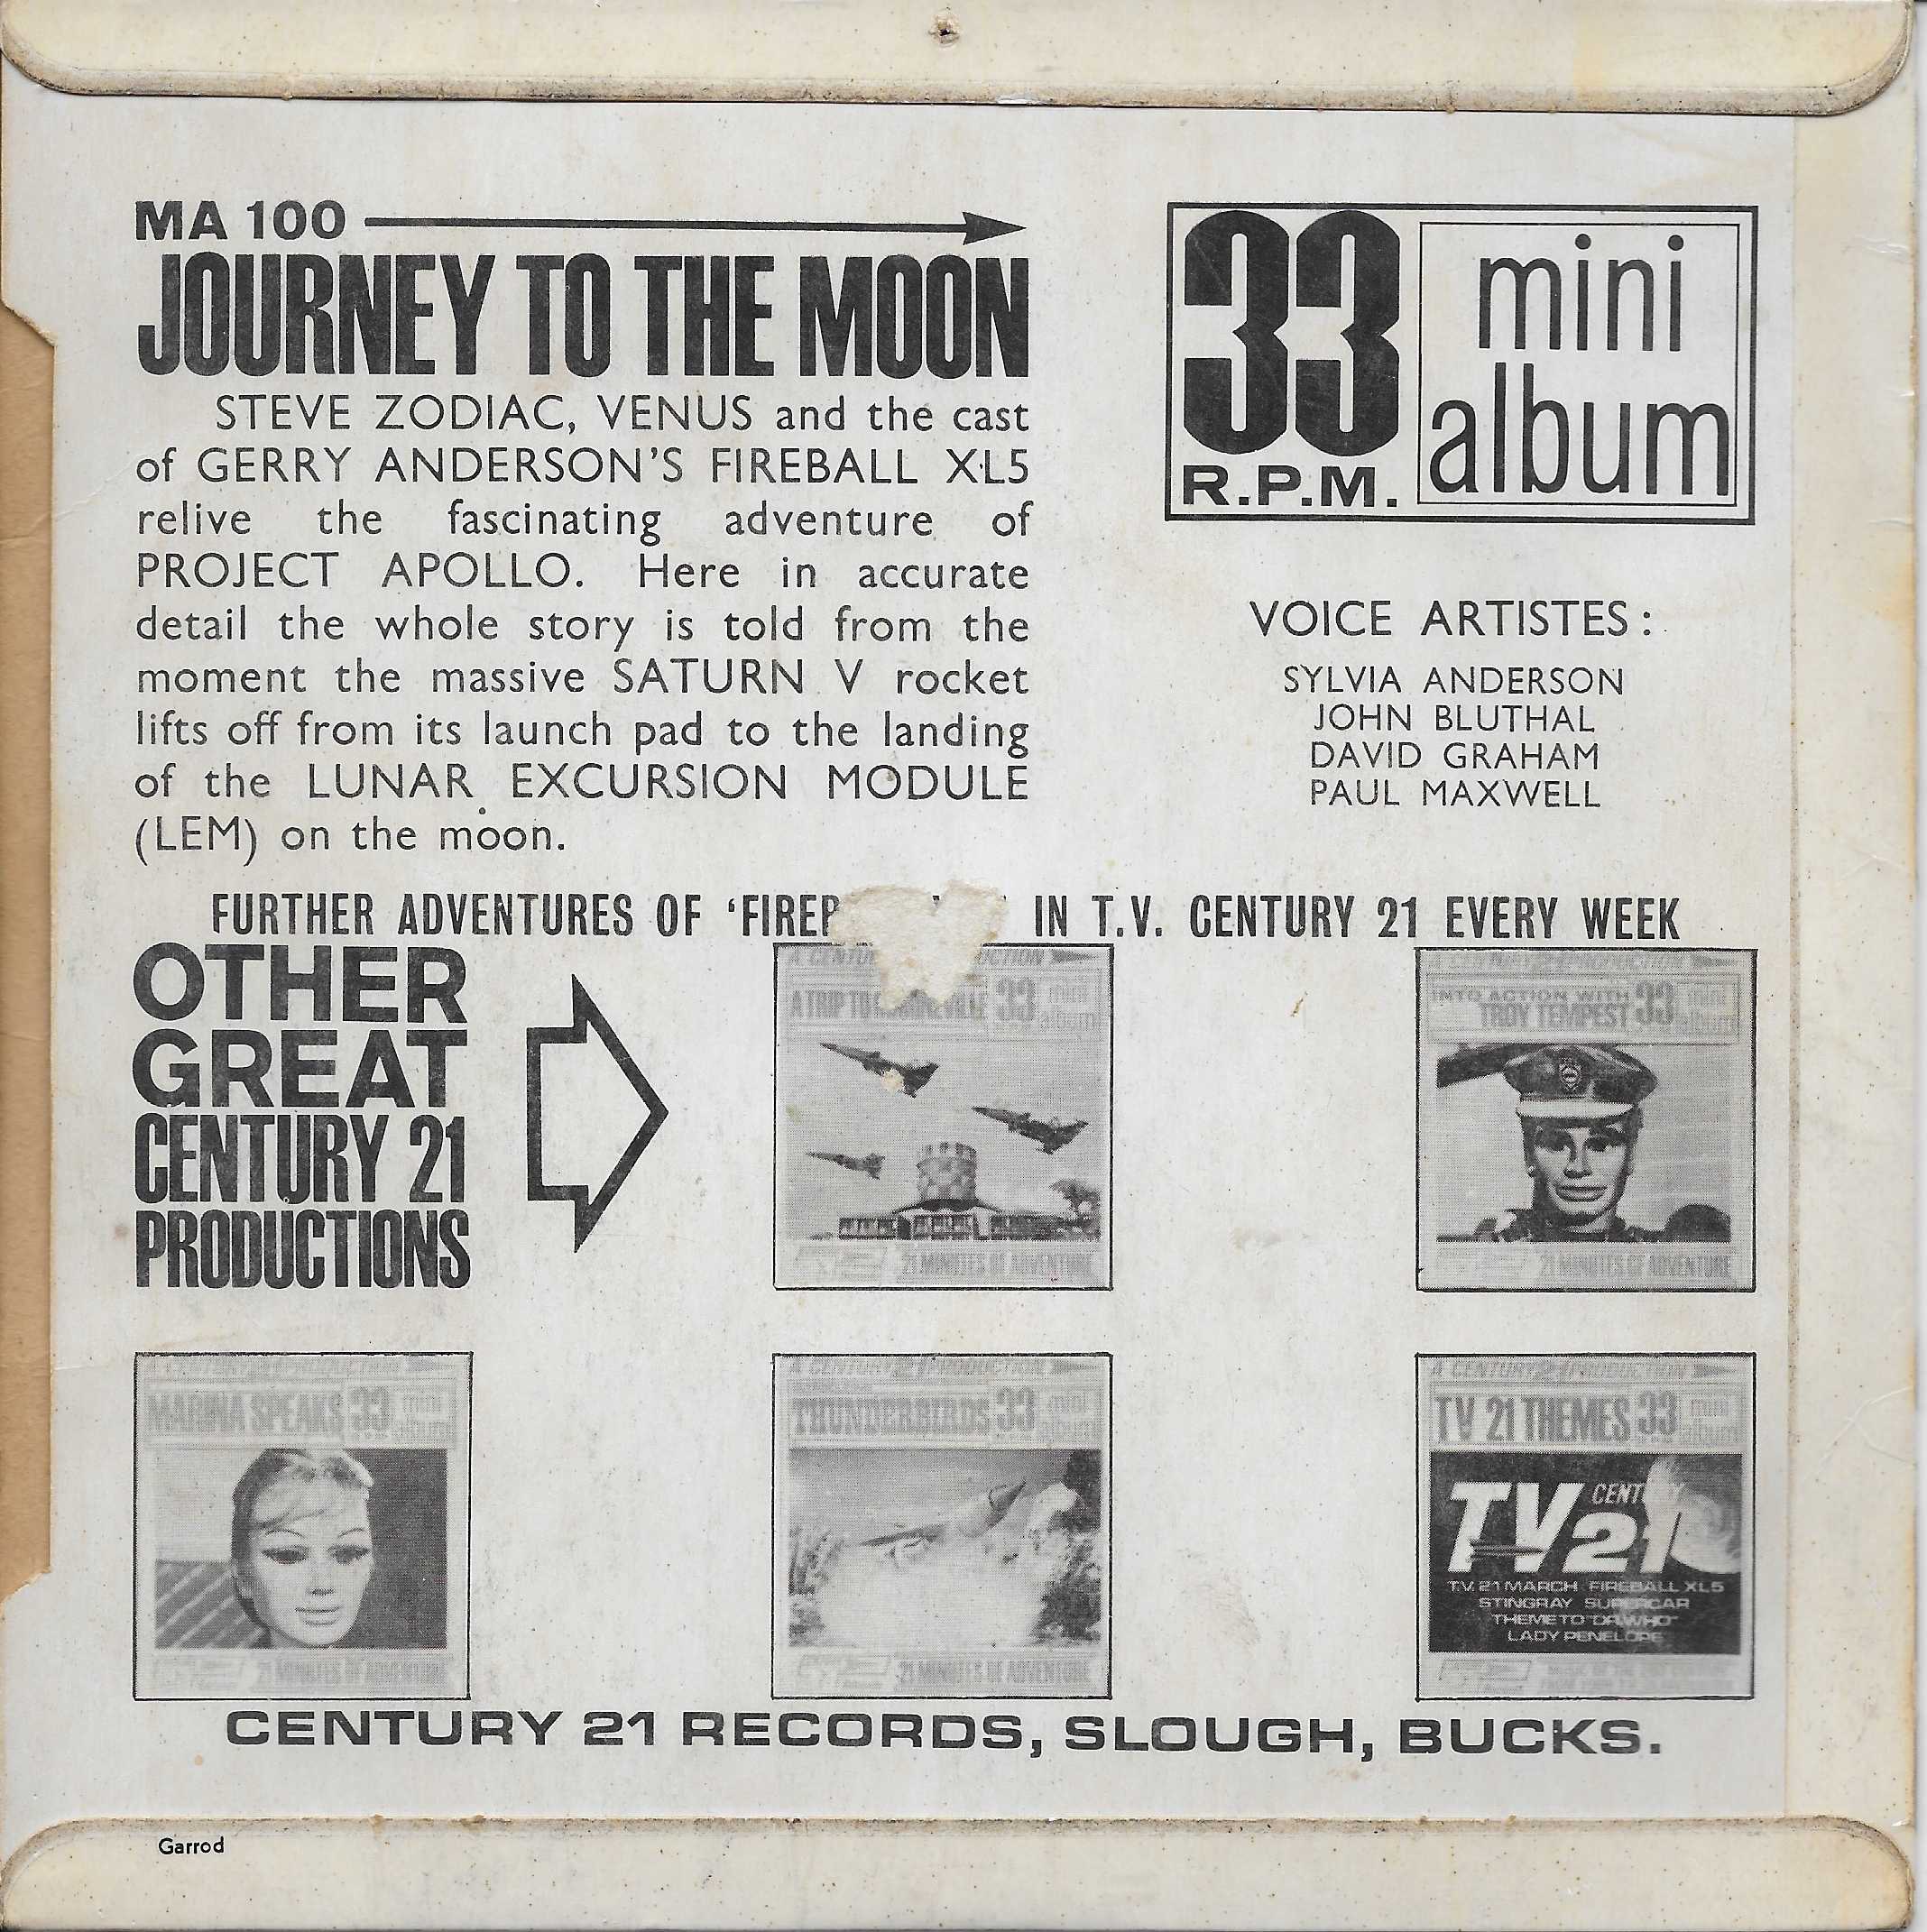 Back cover of MA 100